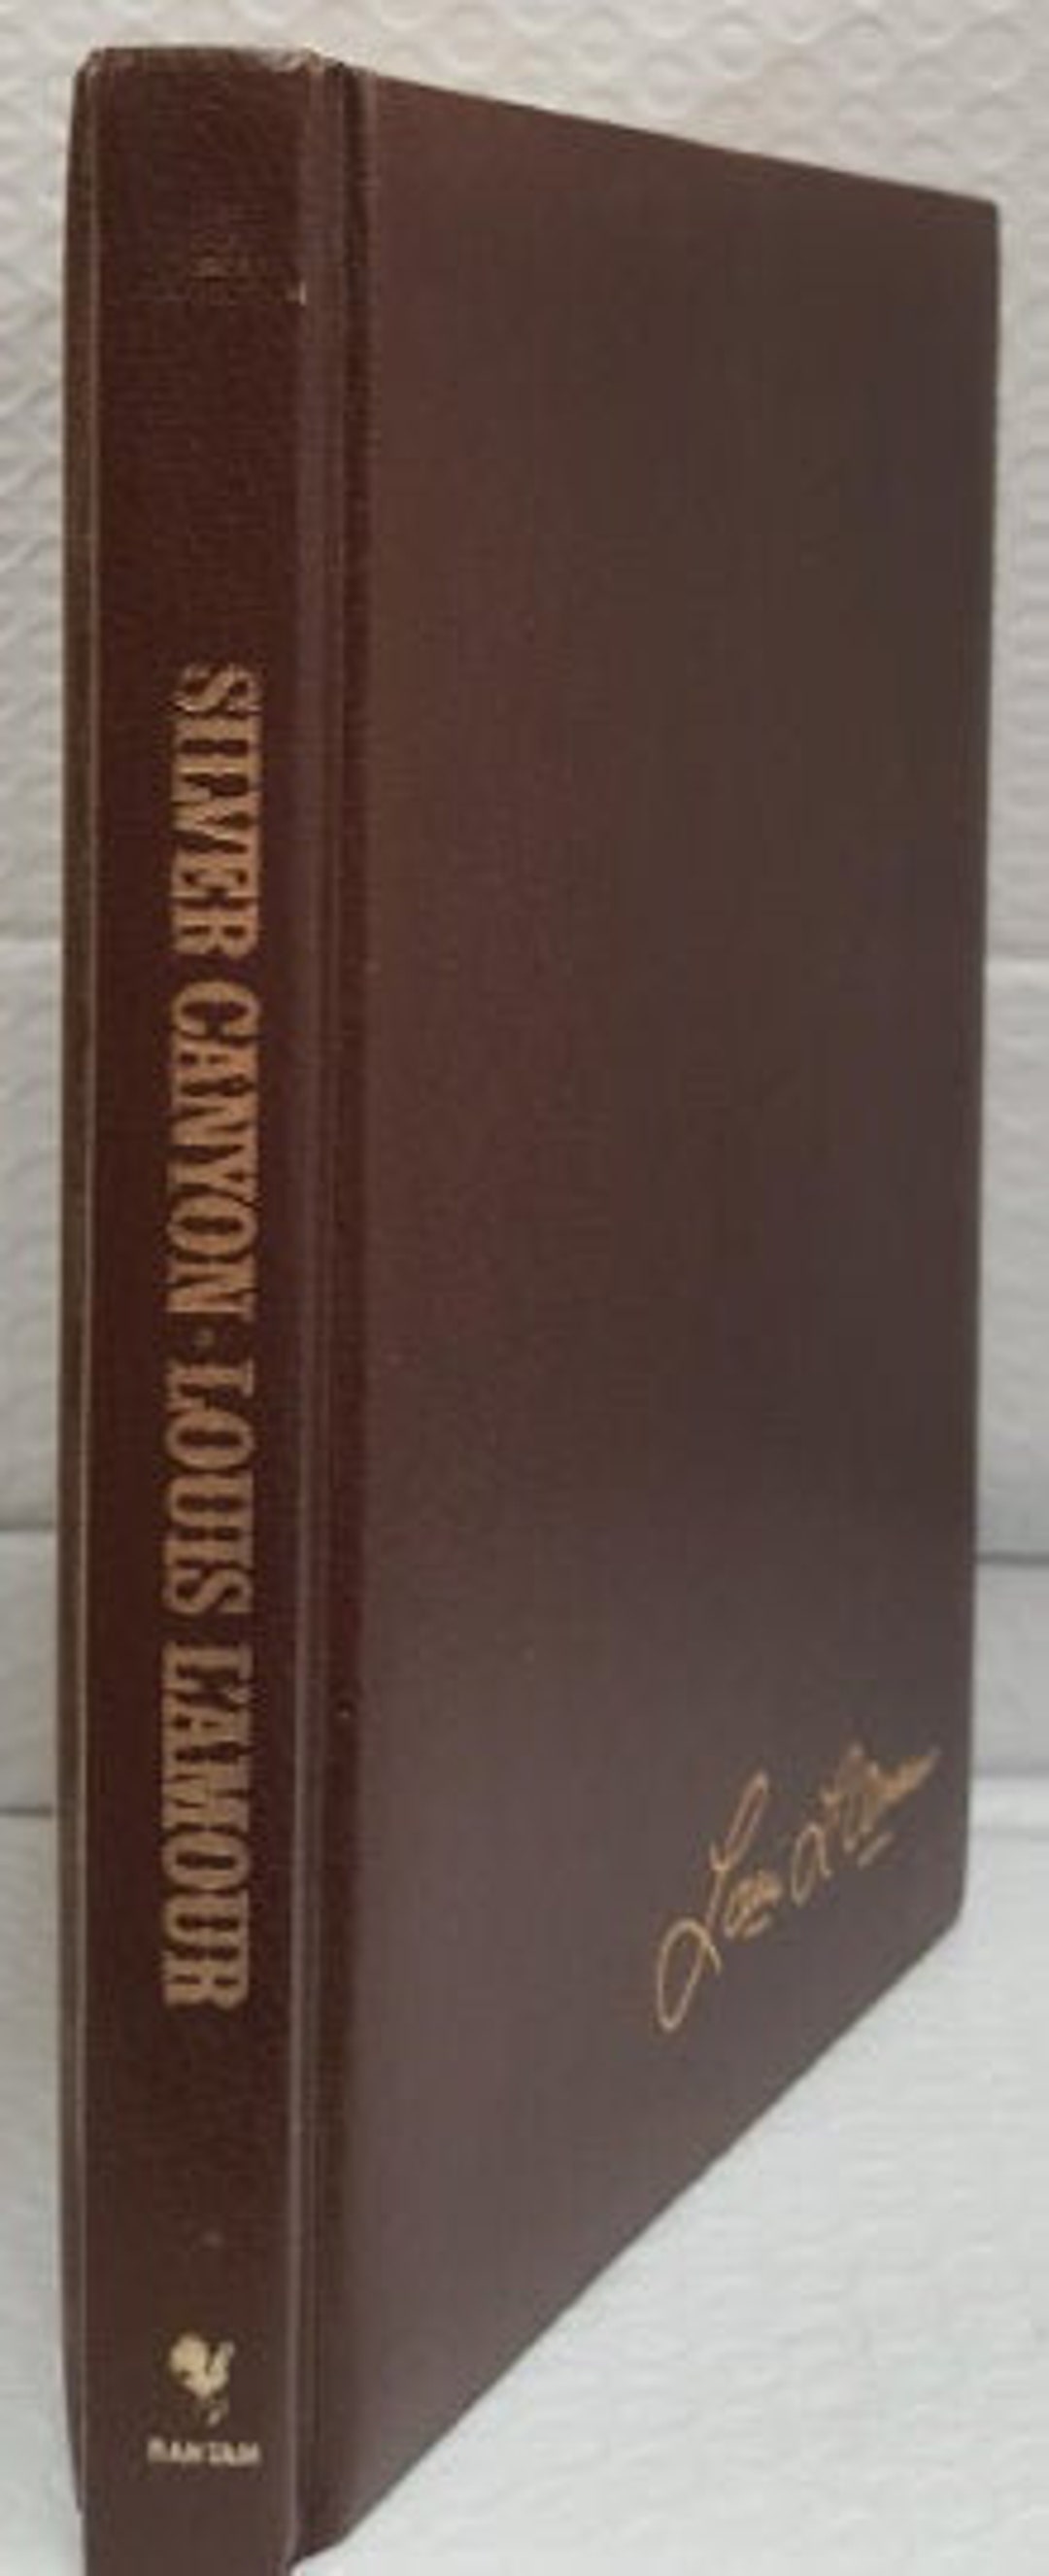 Sell, Buy or Rent Silver Canyon (The Louis L'Amour collection